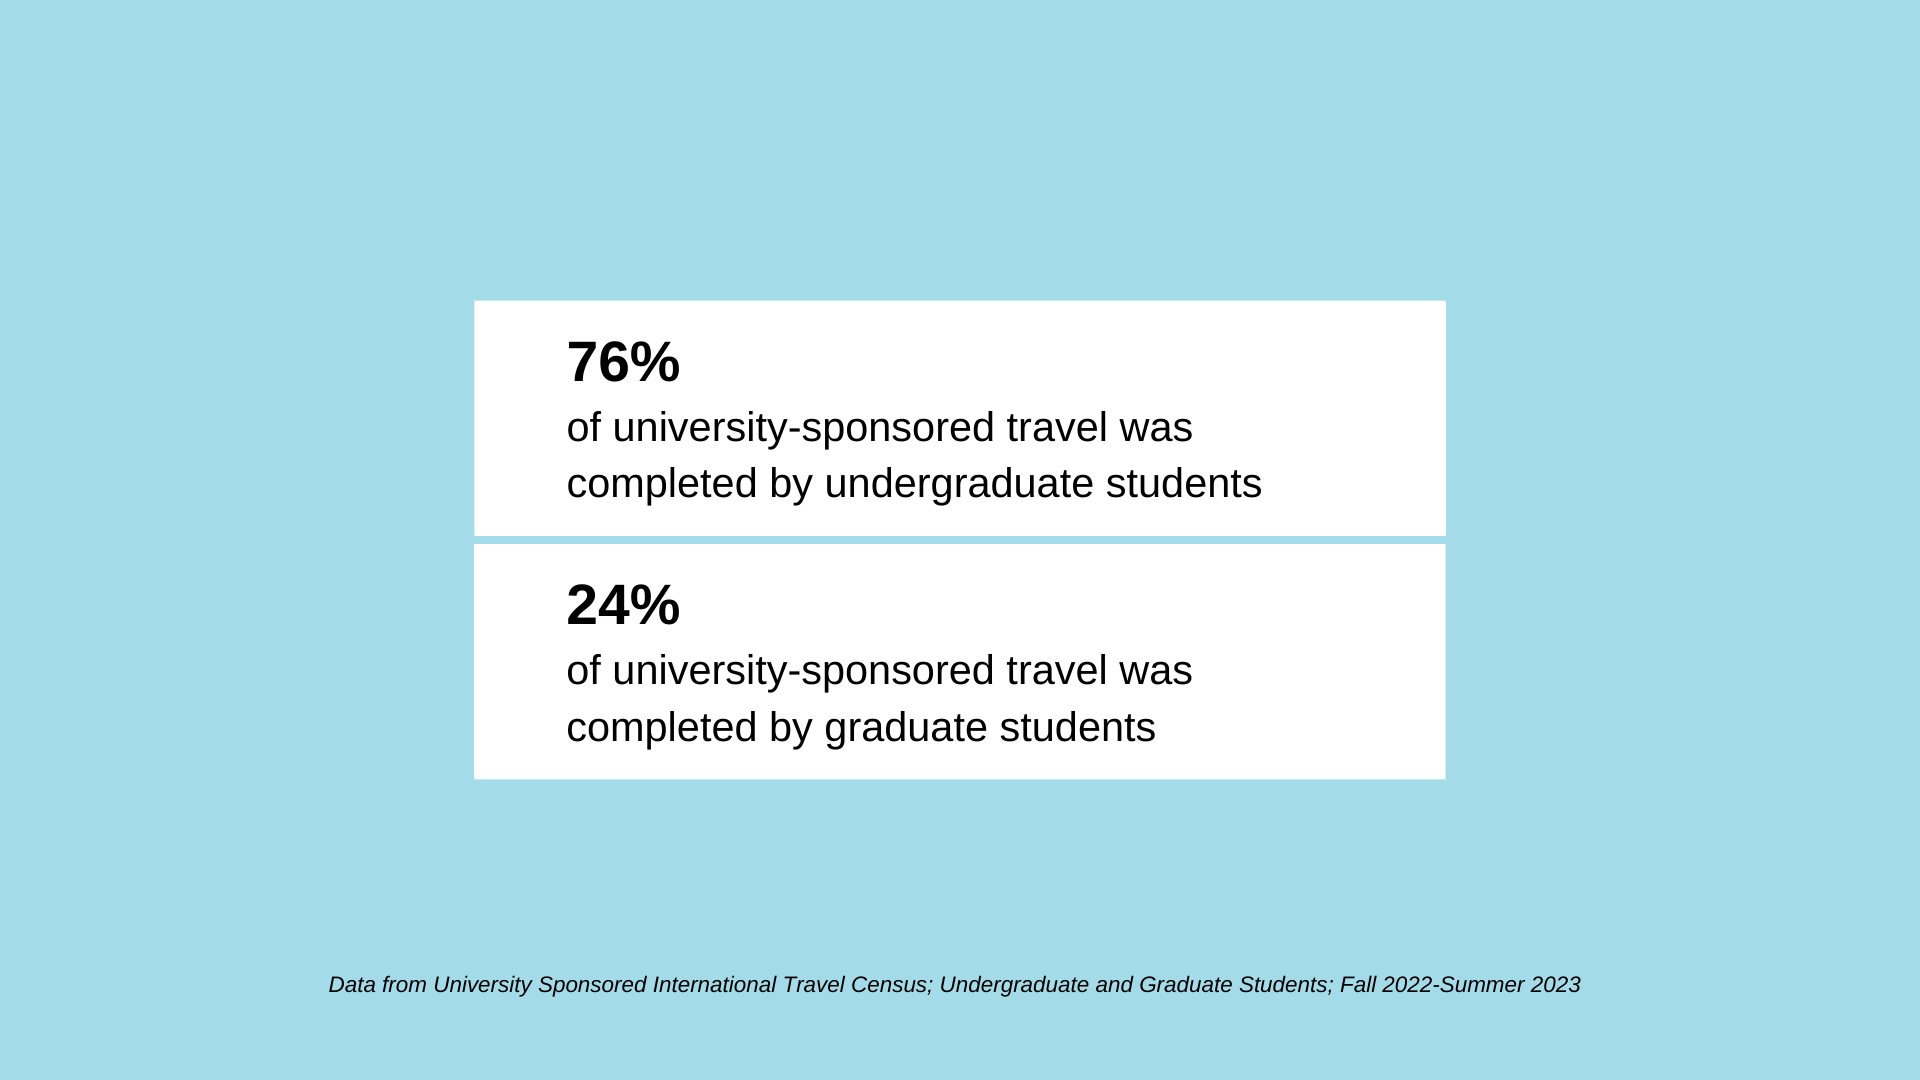 76% of university-sponsored travel was completed by undergraduate students, 24% of university-sponsored travel was completed by graduate students; data from Data from University Sponsored International Travel Census; Undergraduate and Graduate Students; Fall 2022-Summer 2023